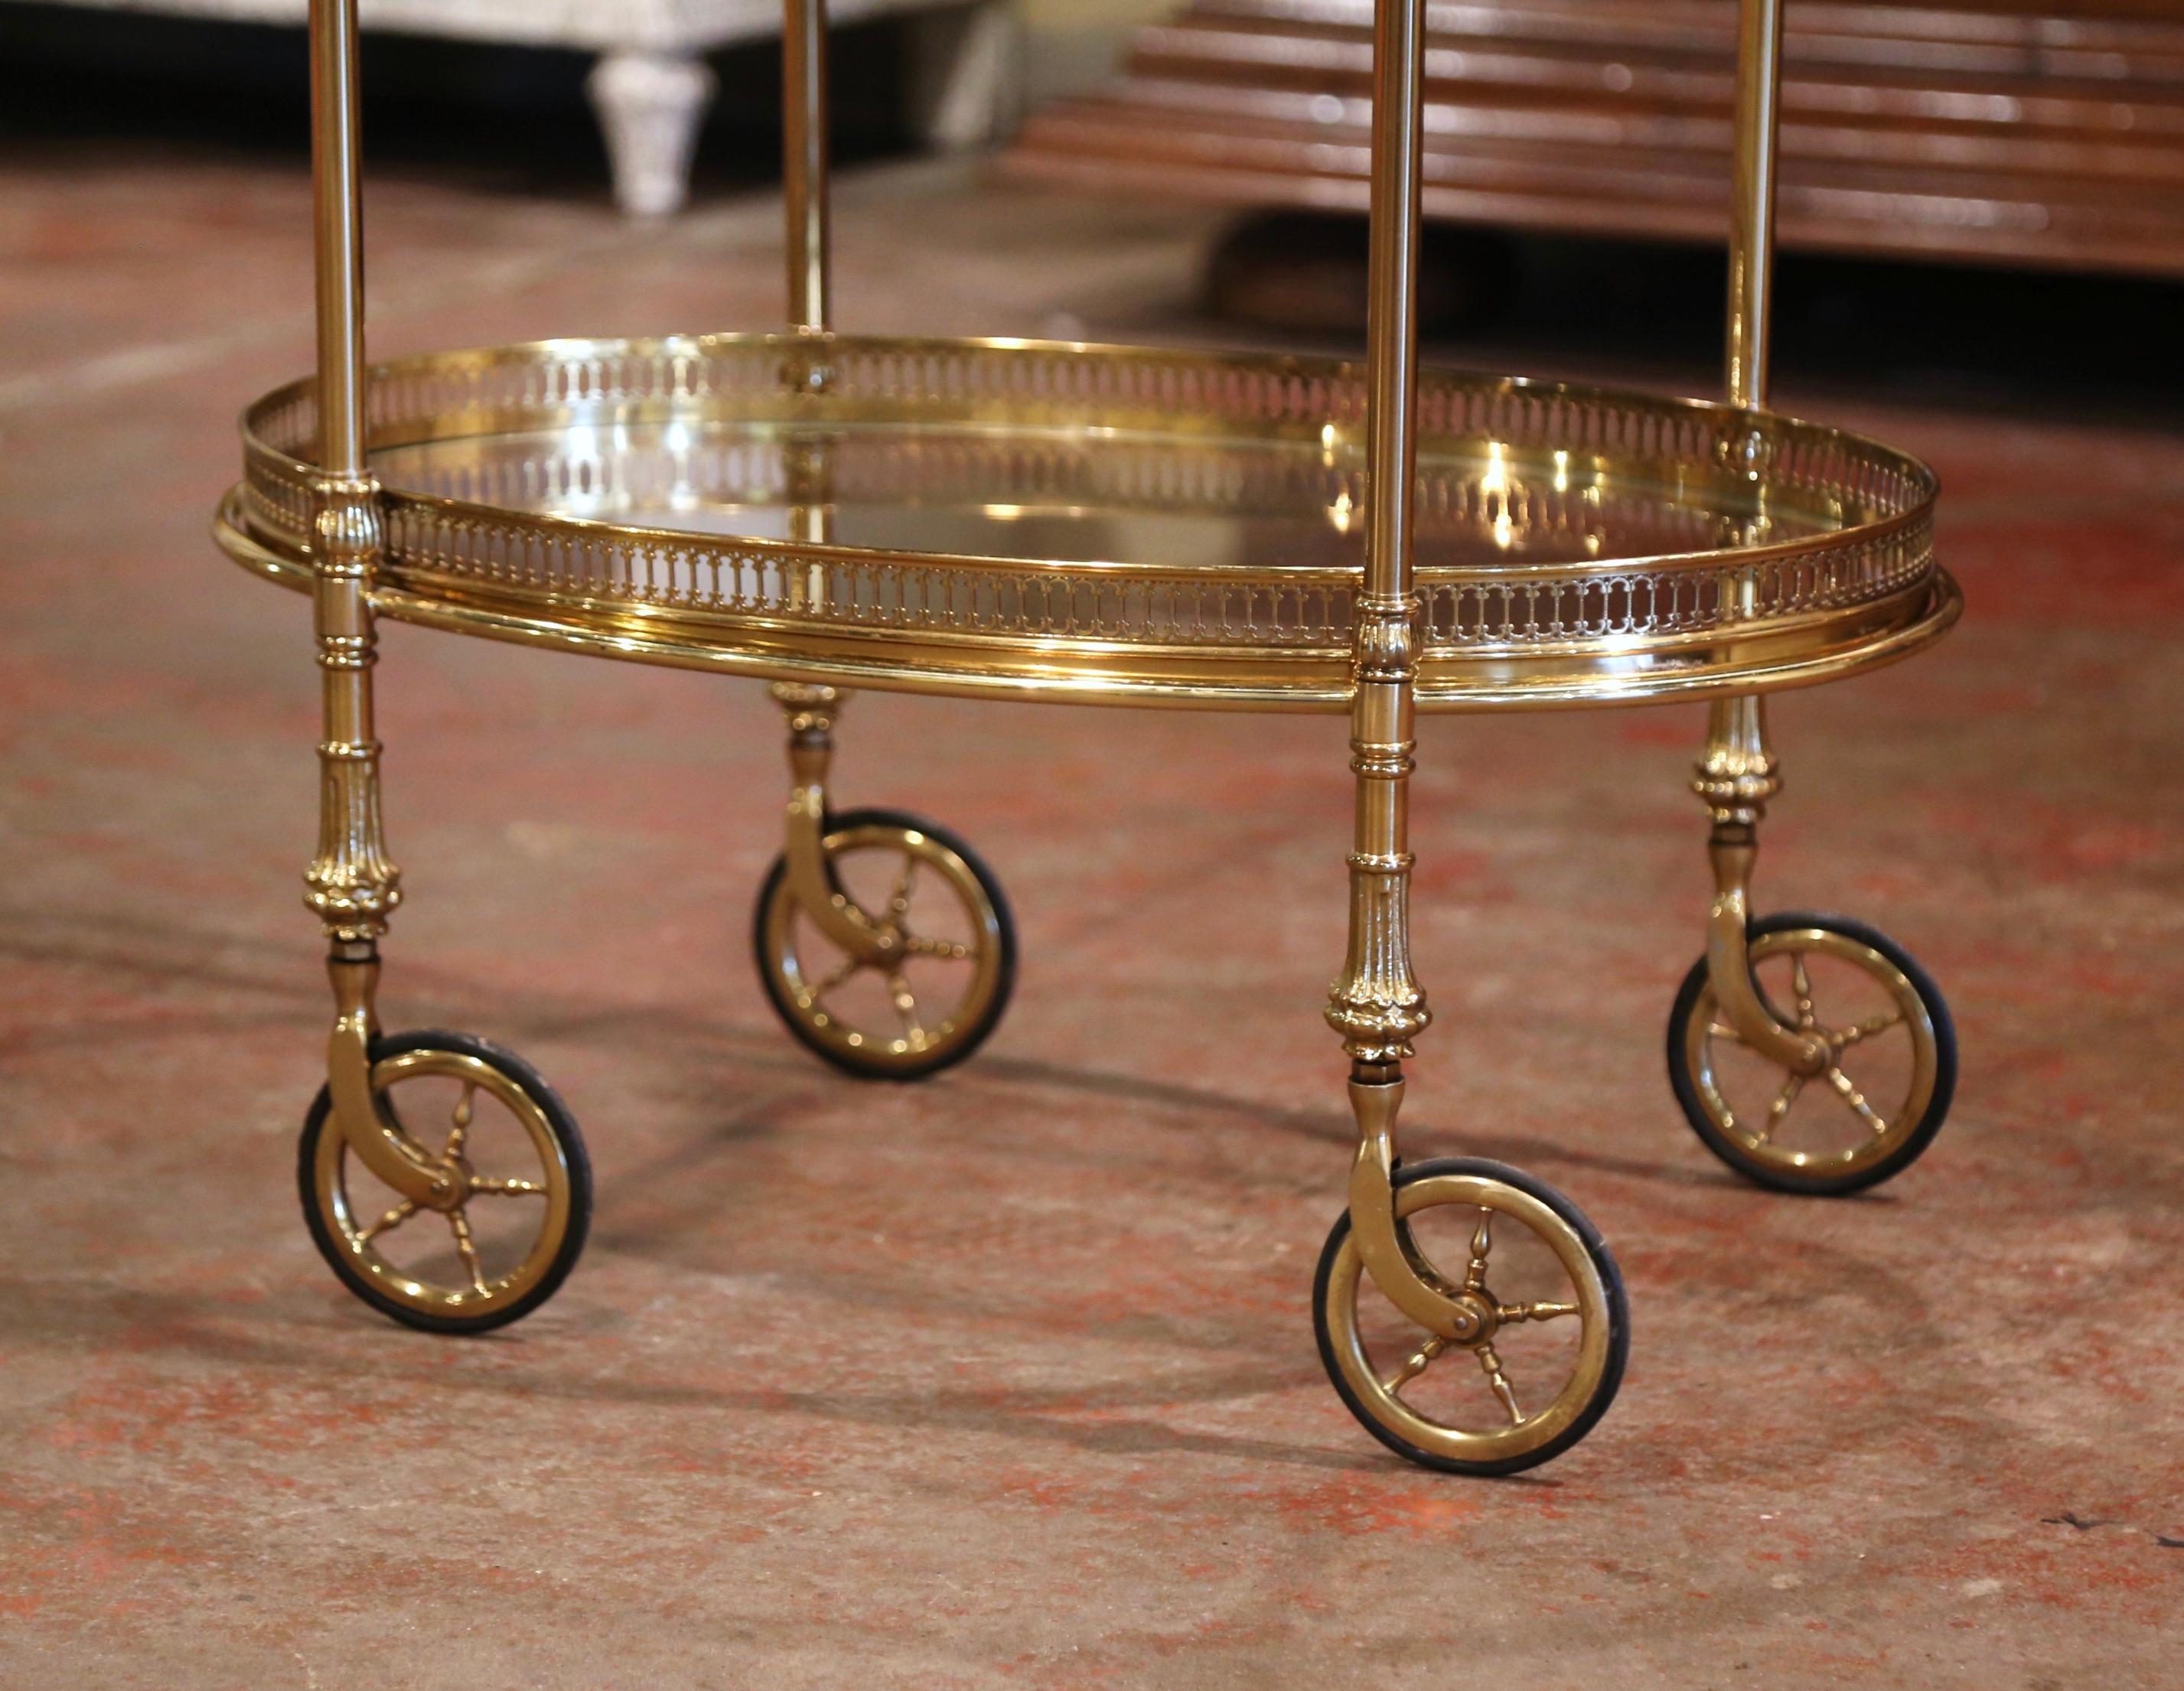 20th Century Midcentury French Polished Brass Dessert Table or Bar Cart on Rubber Wheels